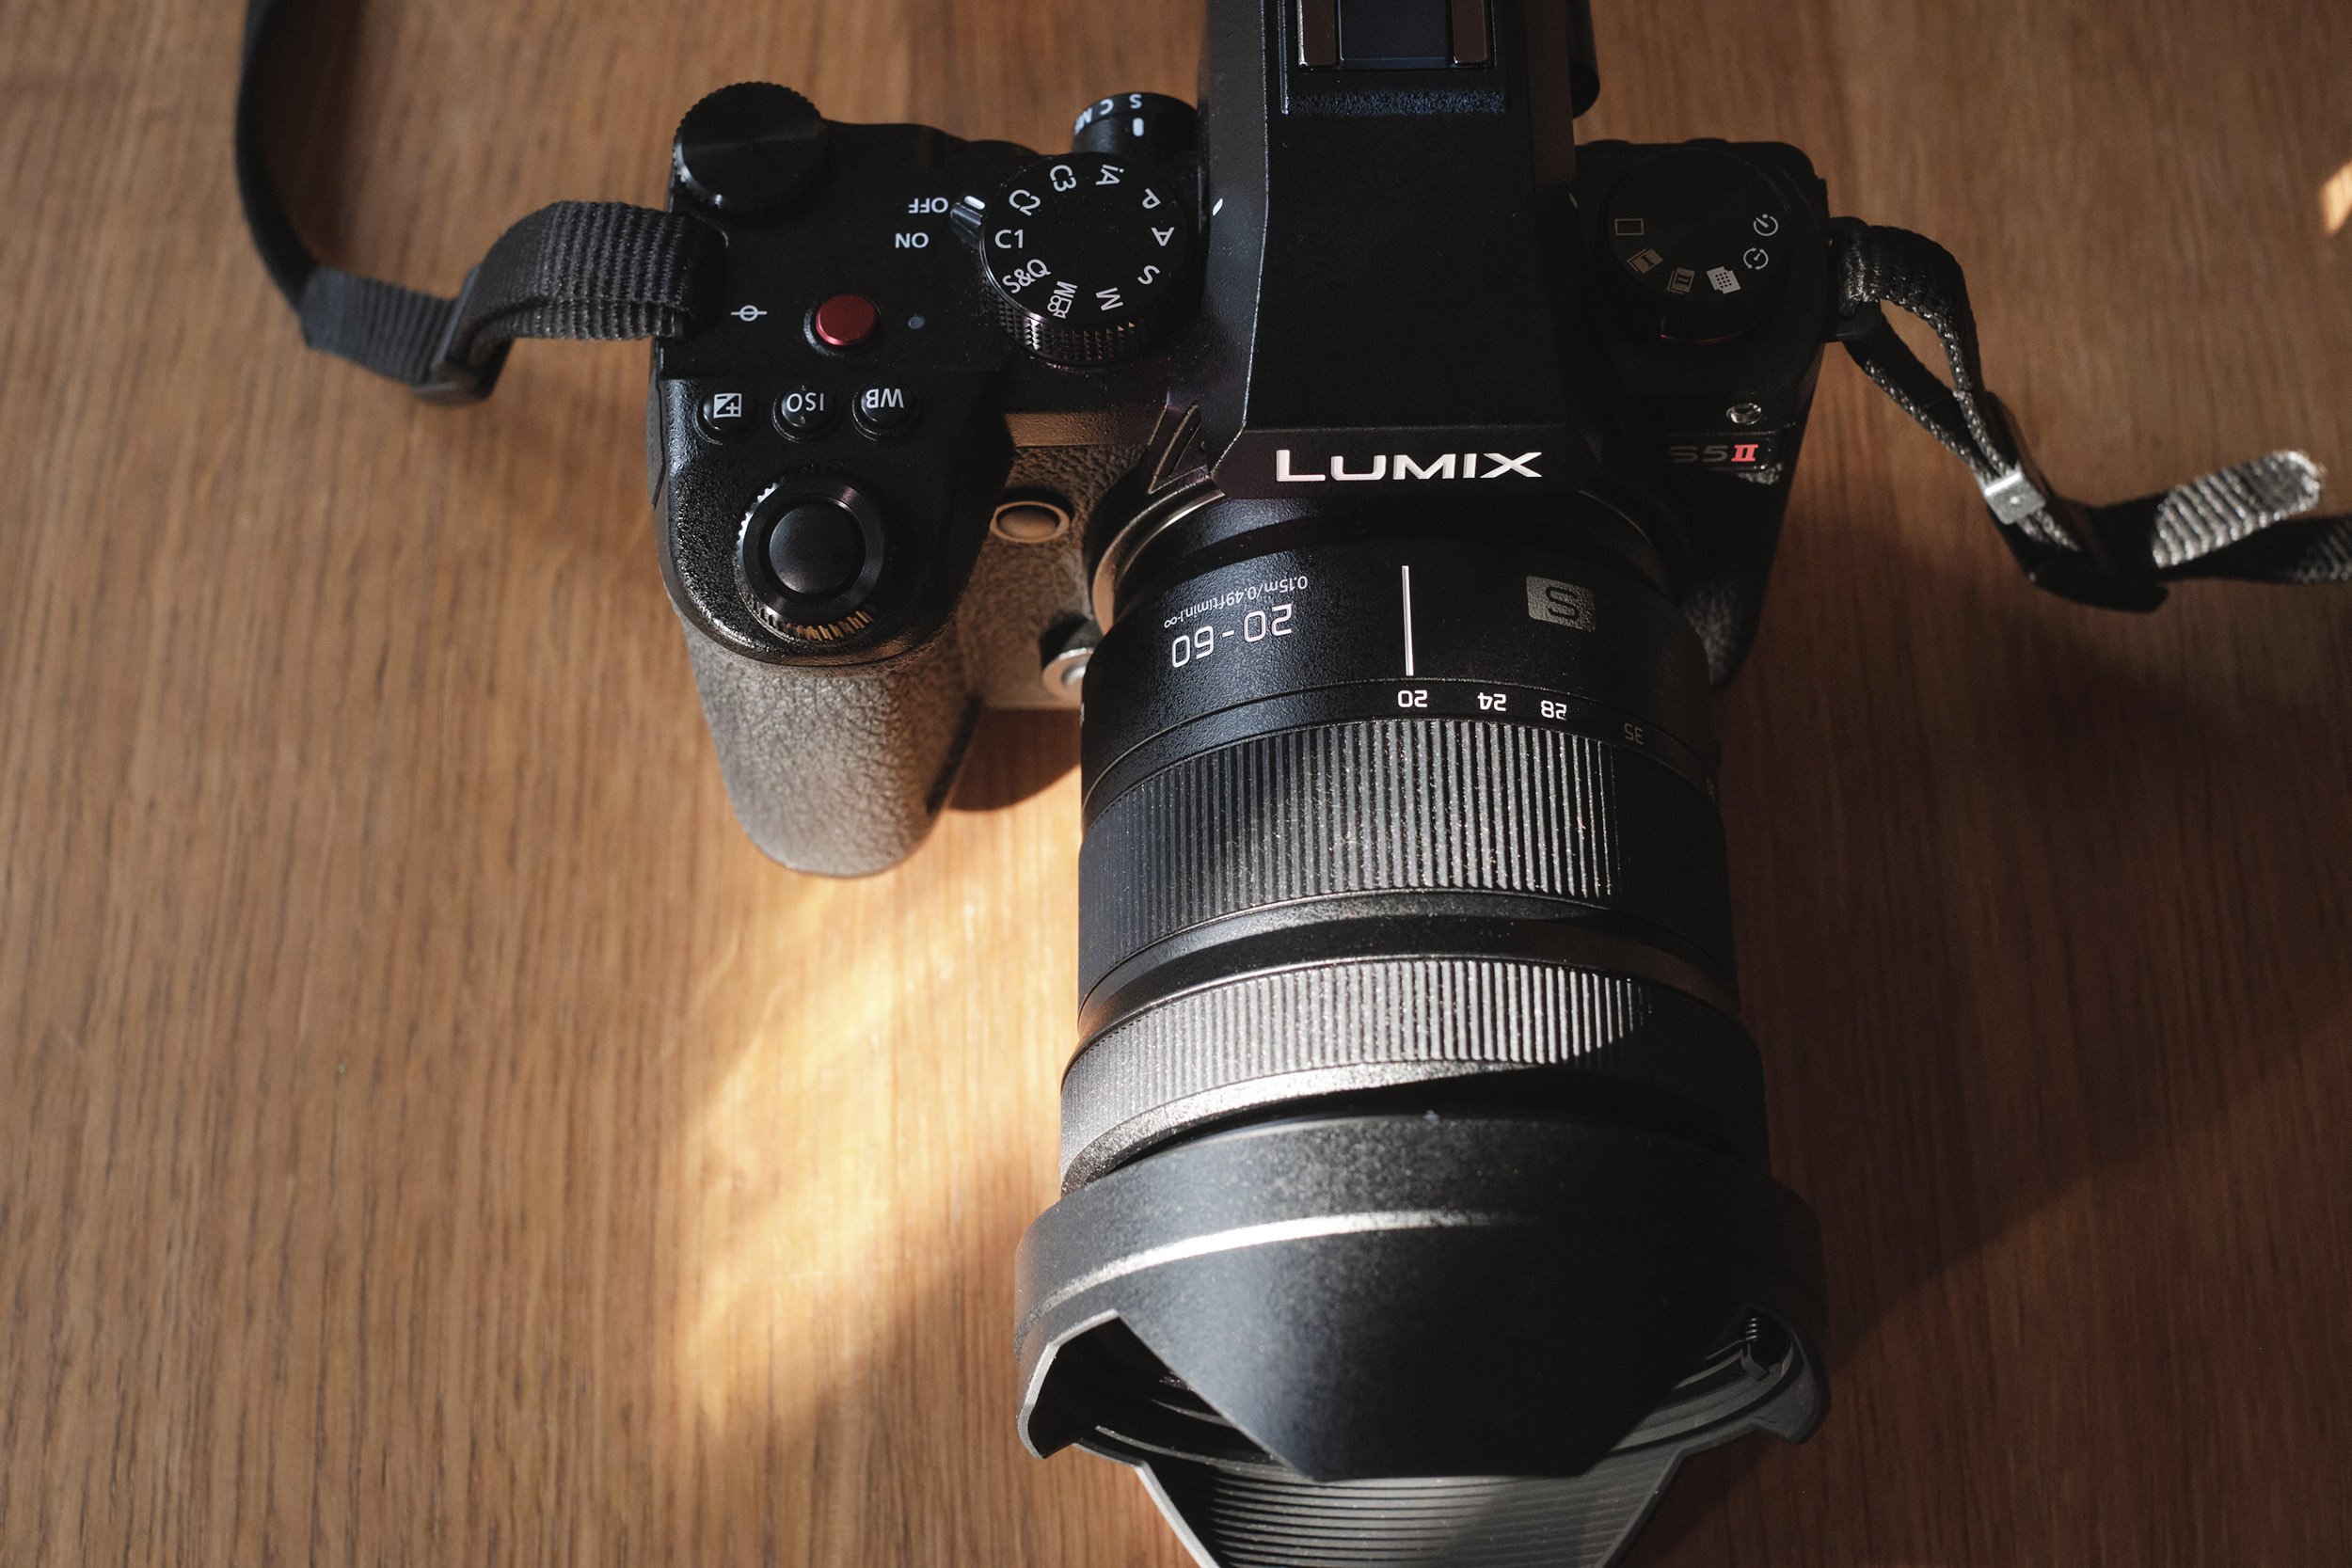 Panasonic Lumix S5 II review: time to switch?